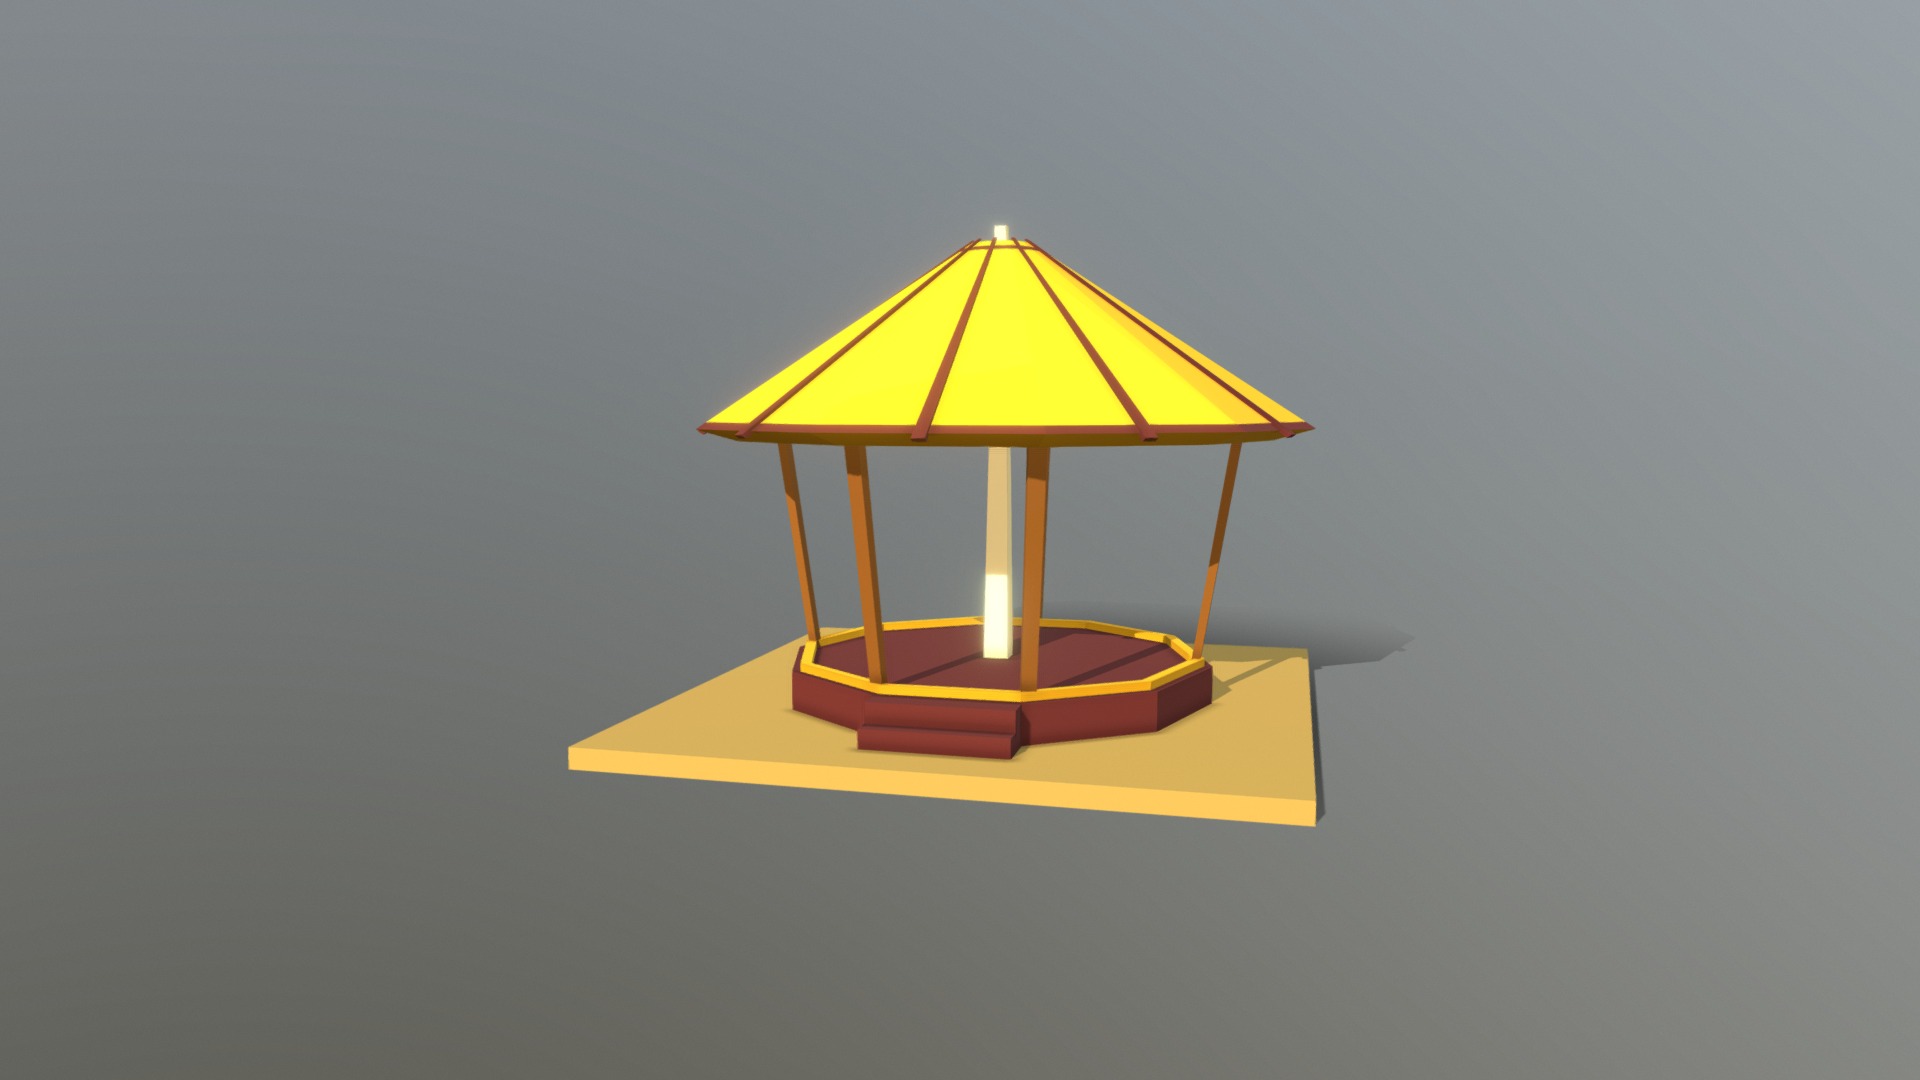 3D model HIE Gazebo N1 - This is a 3D model of the HIE Gazebo N1. The 3D model is about a small wooden structure.